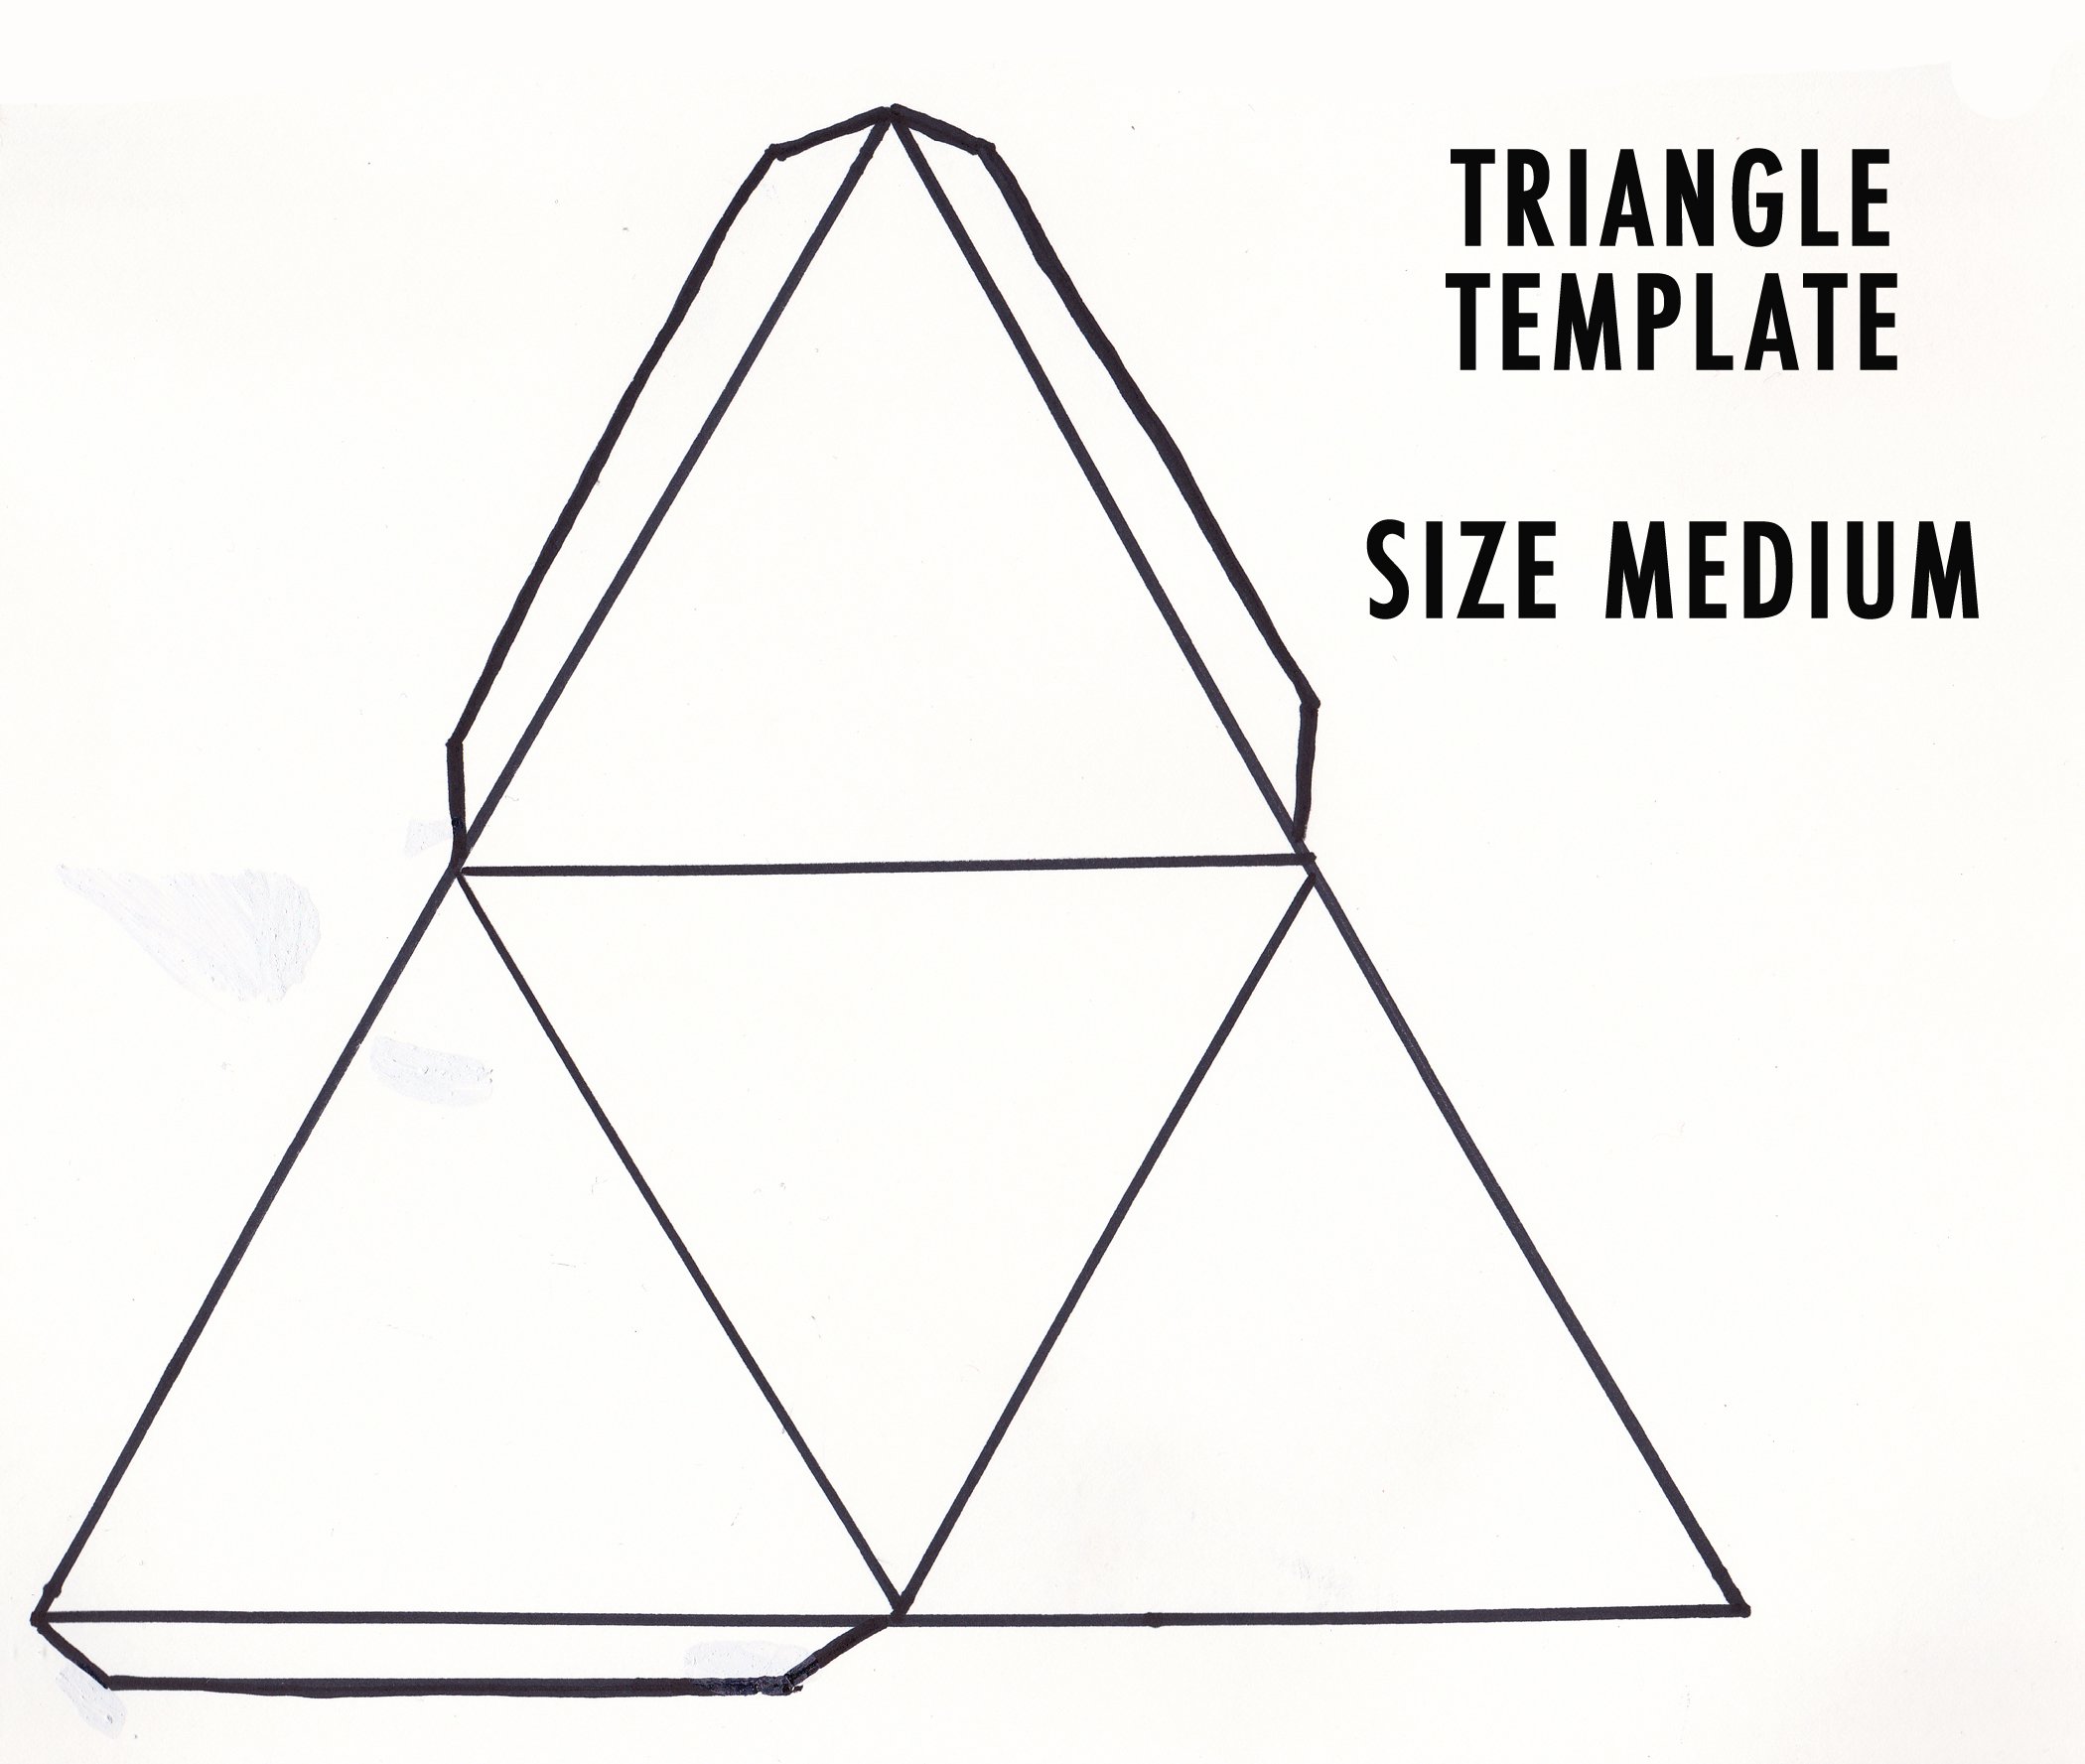 4-best-images-of-triangular-pyramid-template-printable-paper-triangle